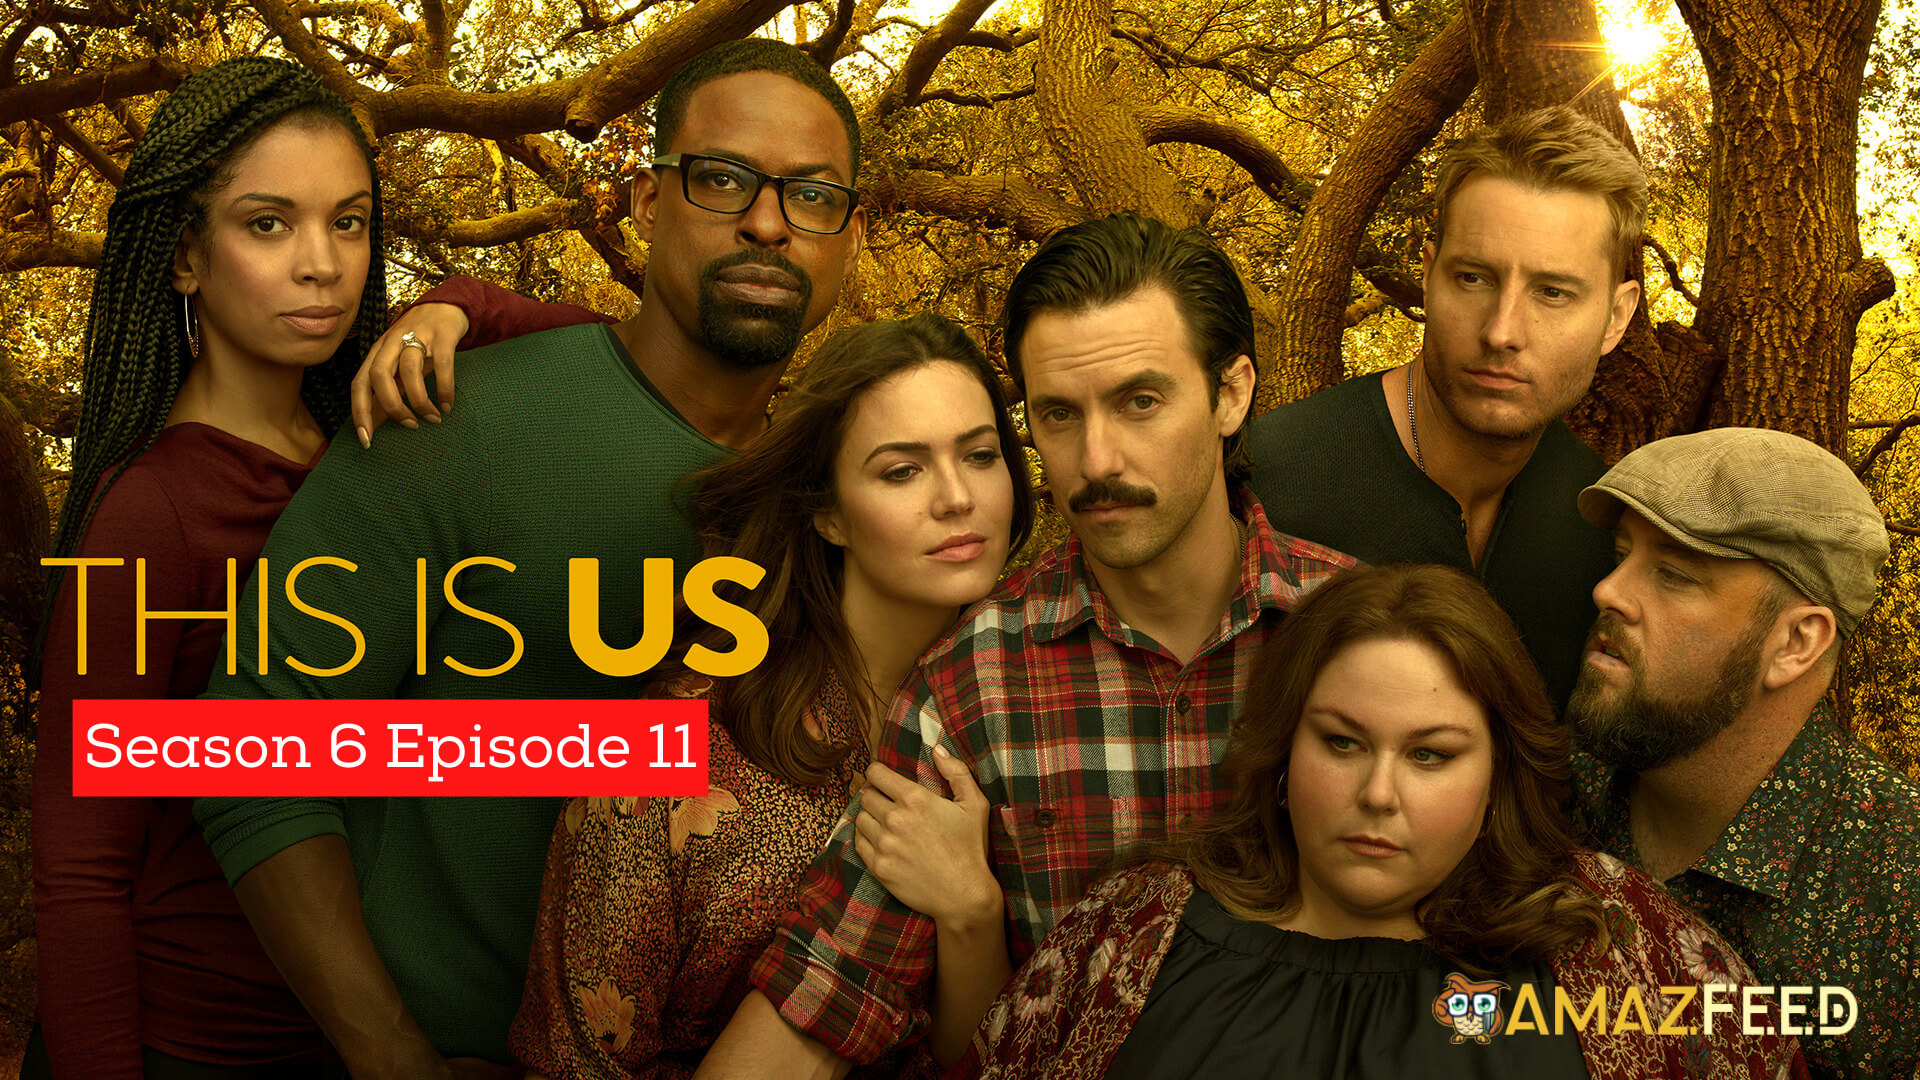 This Is Us Season 6 Episode 11 Release Date